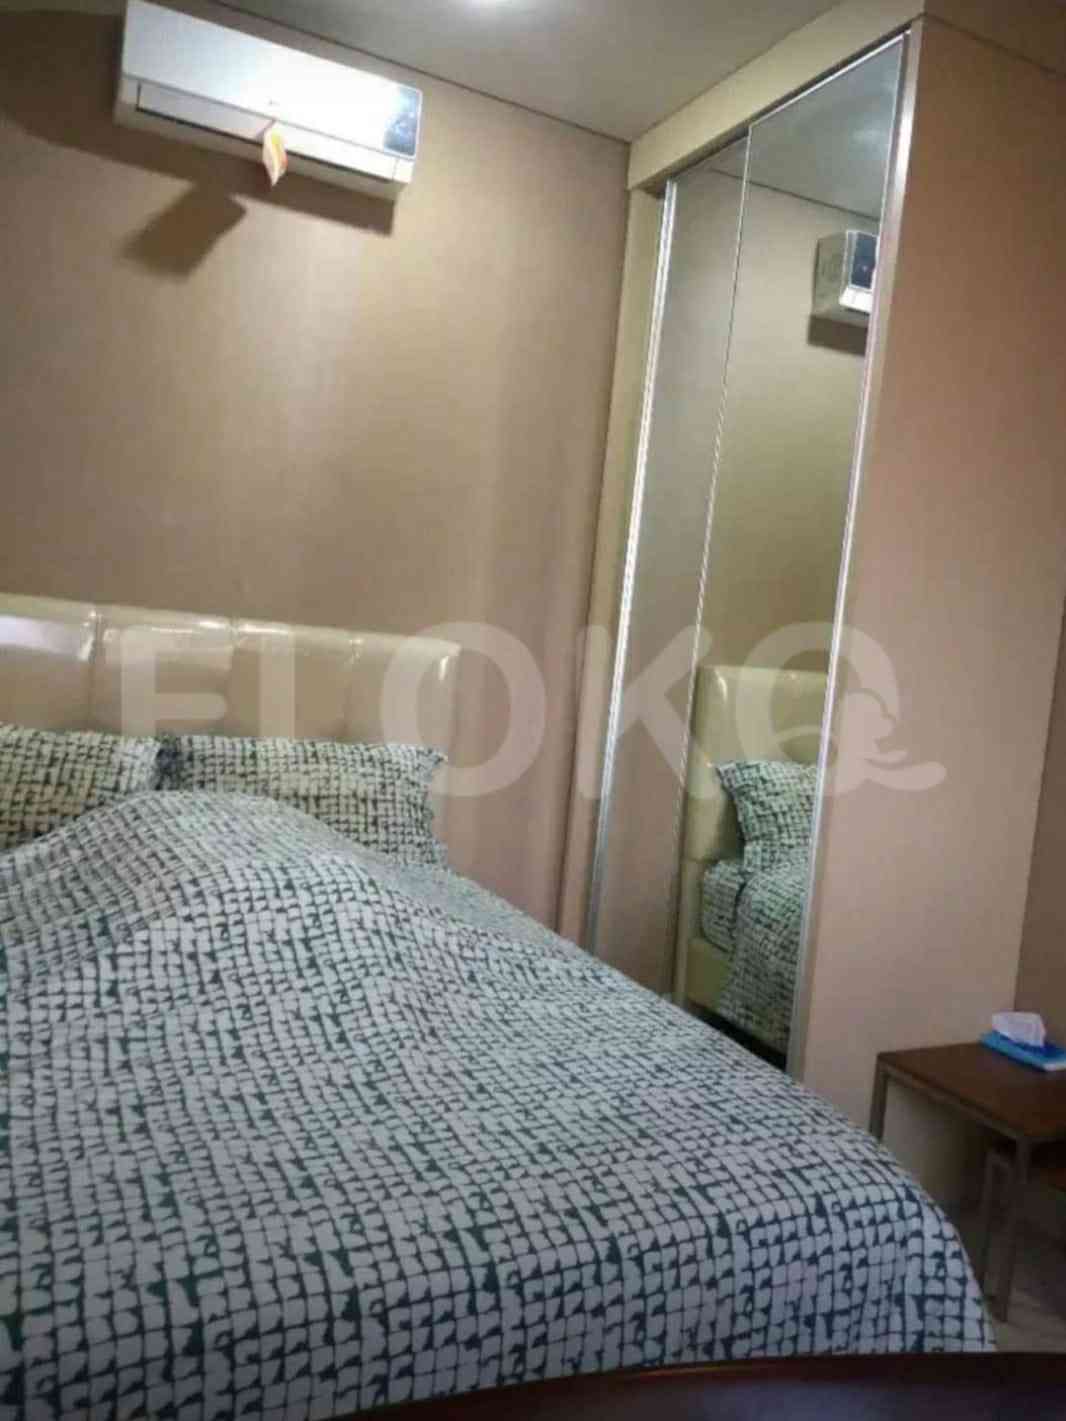 2 Bedroom on 15th Floor for Rent in Kuningan Place Apartment - fku817 6